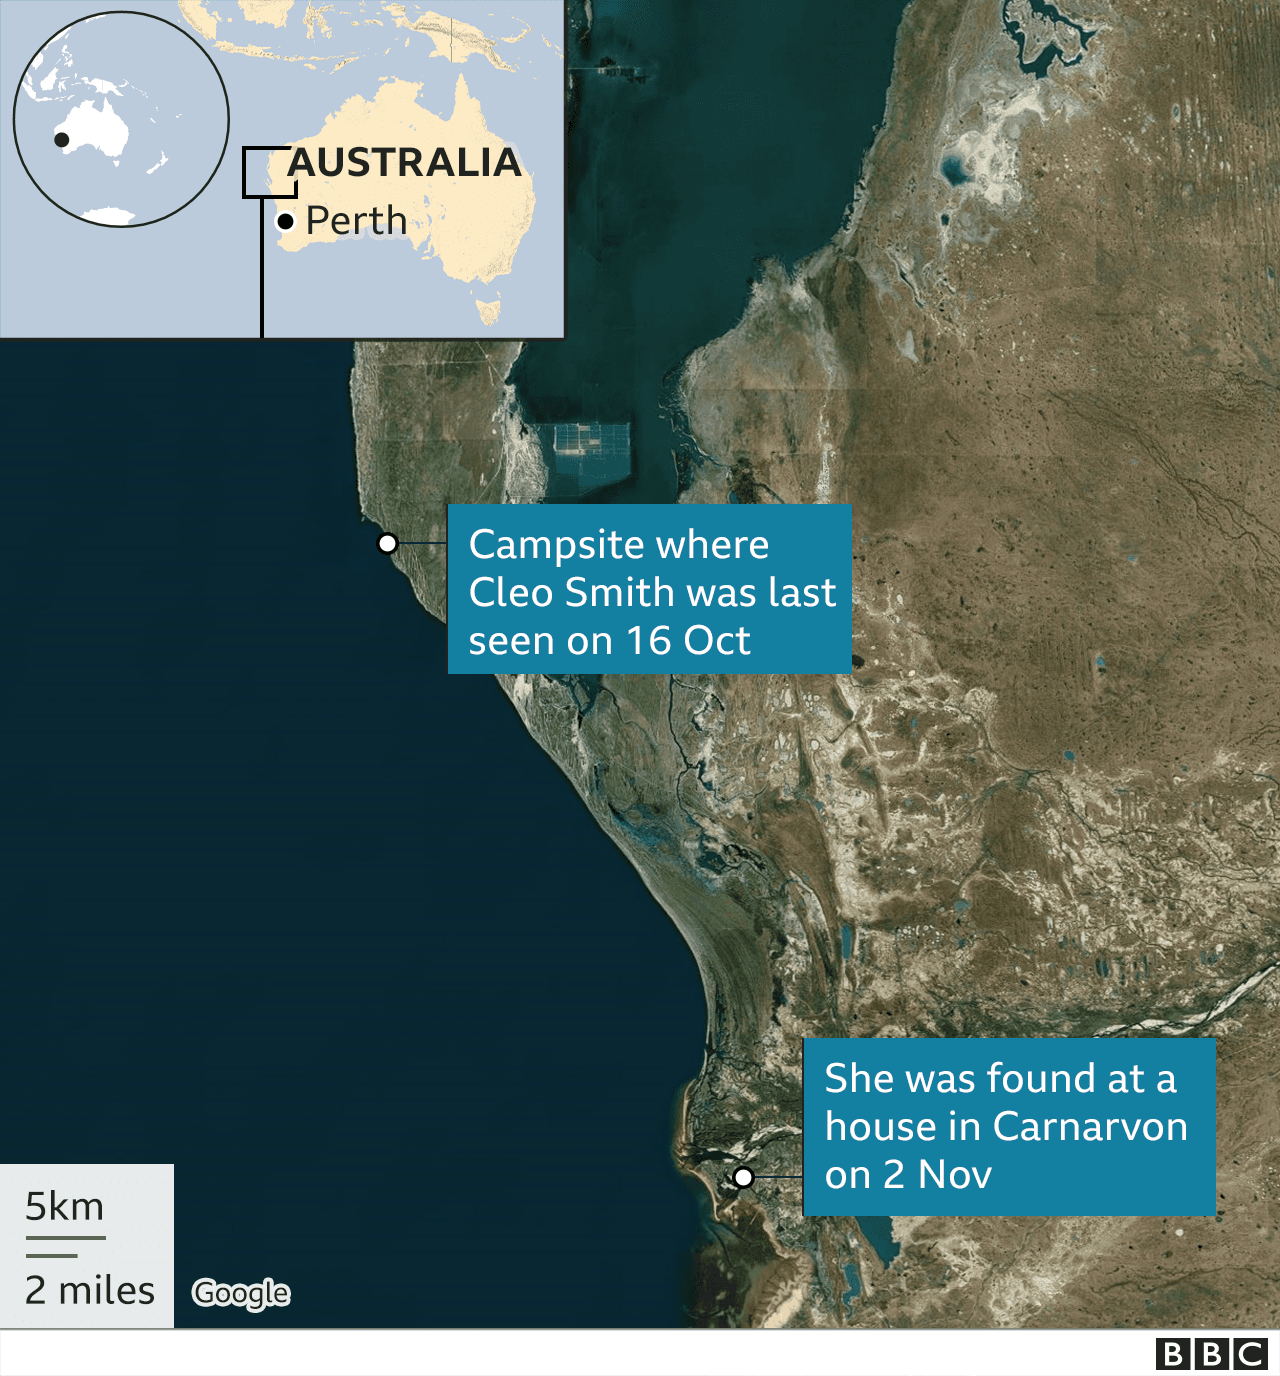 Map showing where Cleo Smith was last seen and where she was found